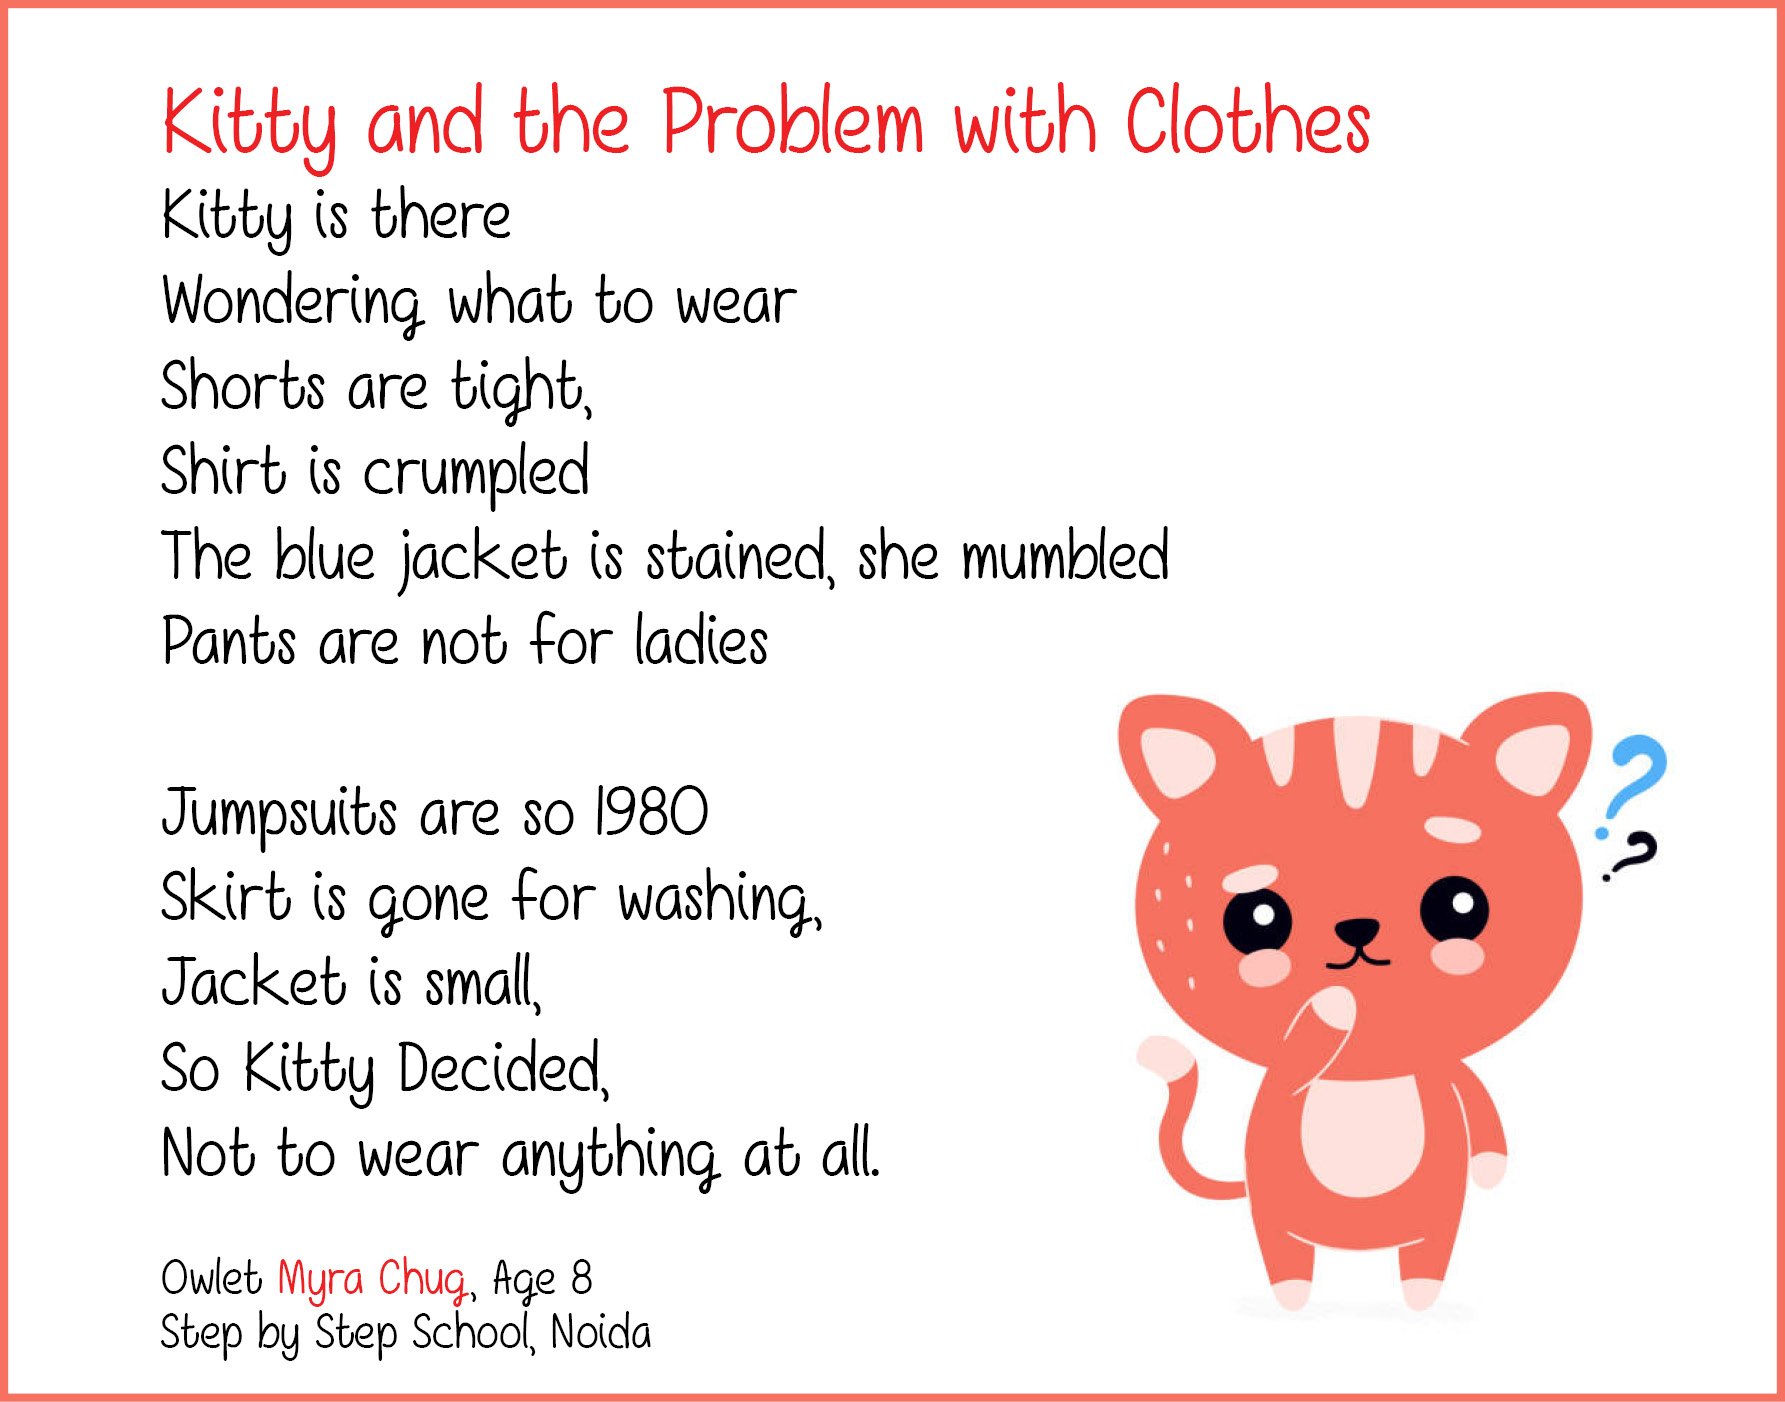 Kitty and the Problem with Clothes